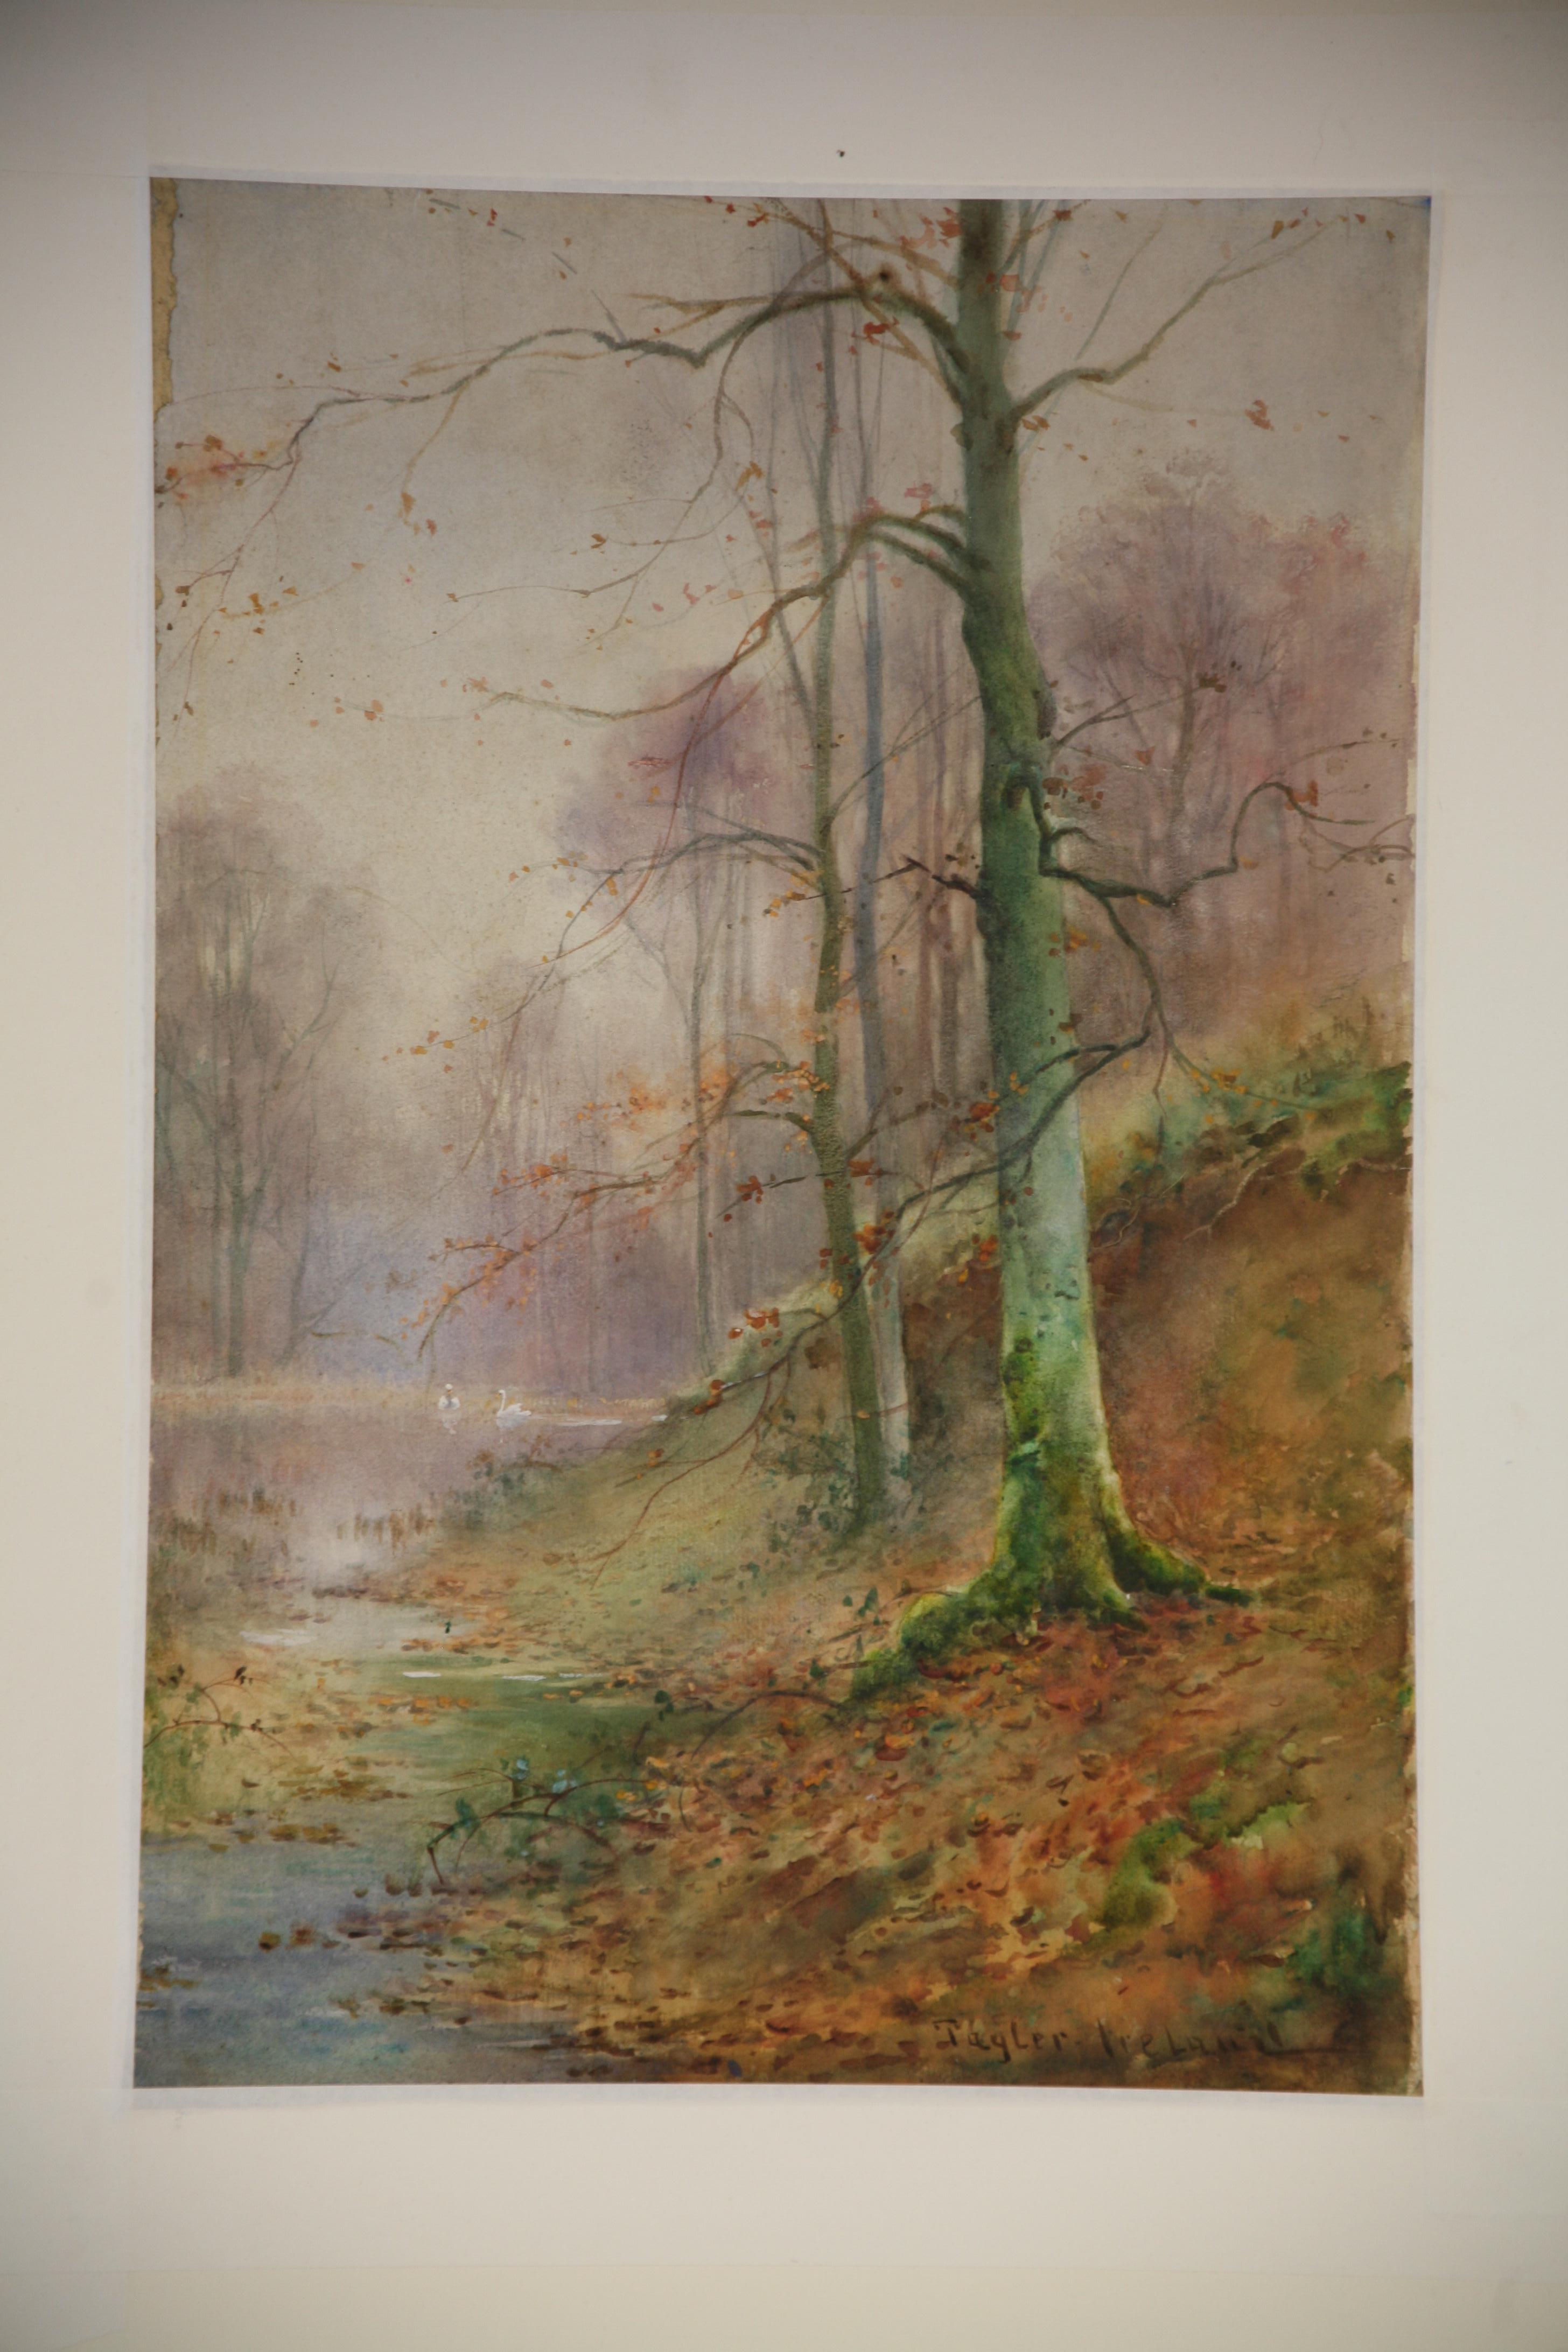 Superb watercolour drawing by Tayler Ireland Tayler Ireland was a British landscape painter working in oils and watercolour at the turn of the century and believed to be the son of artist Thomas Ireland, living in London. Thomas Tayler Ireland